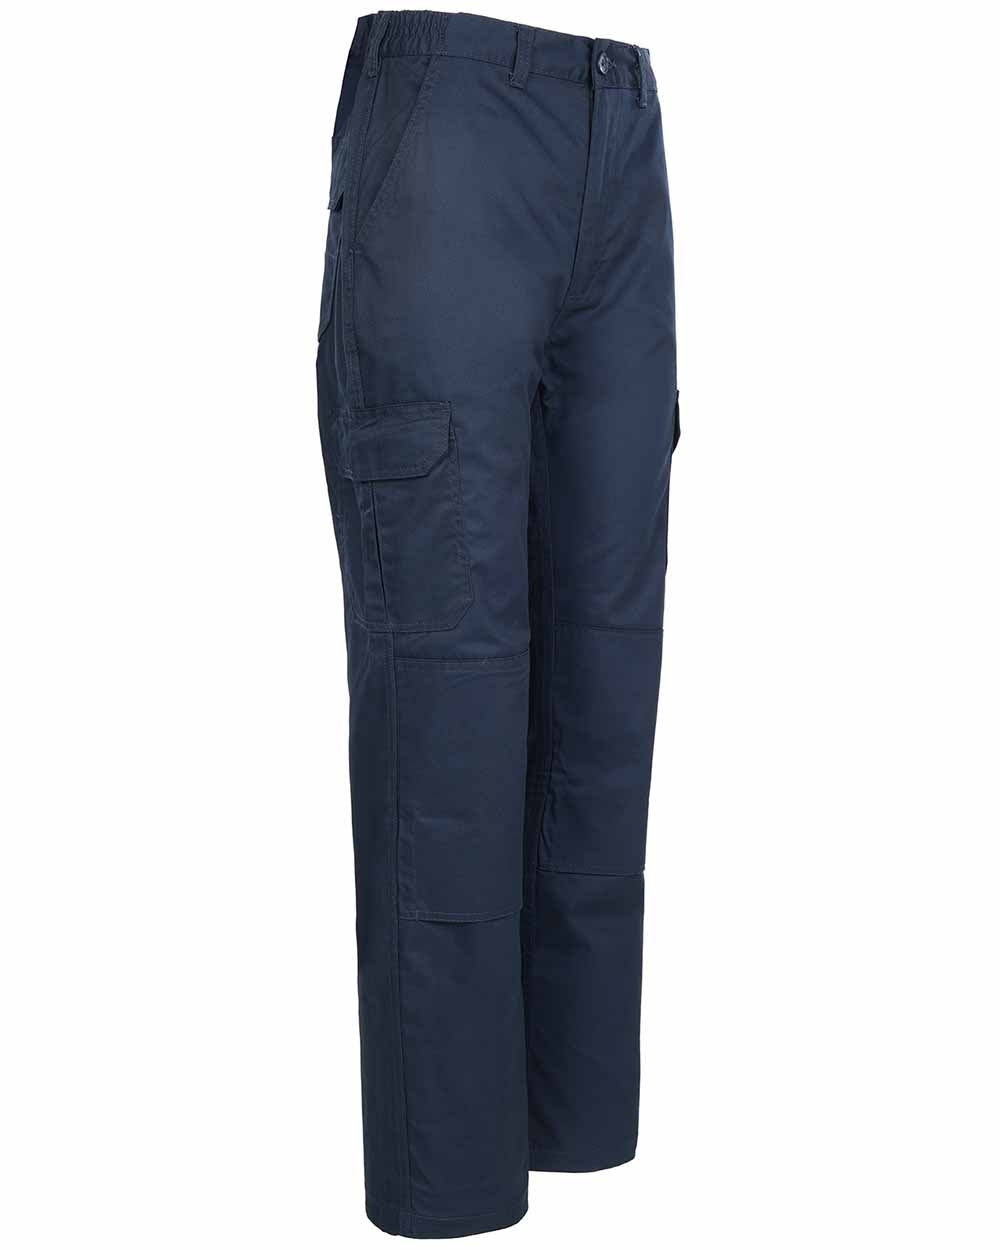 Thigh cargo pockets Fort Workforce Trousers in Navy 